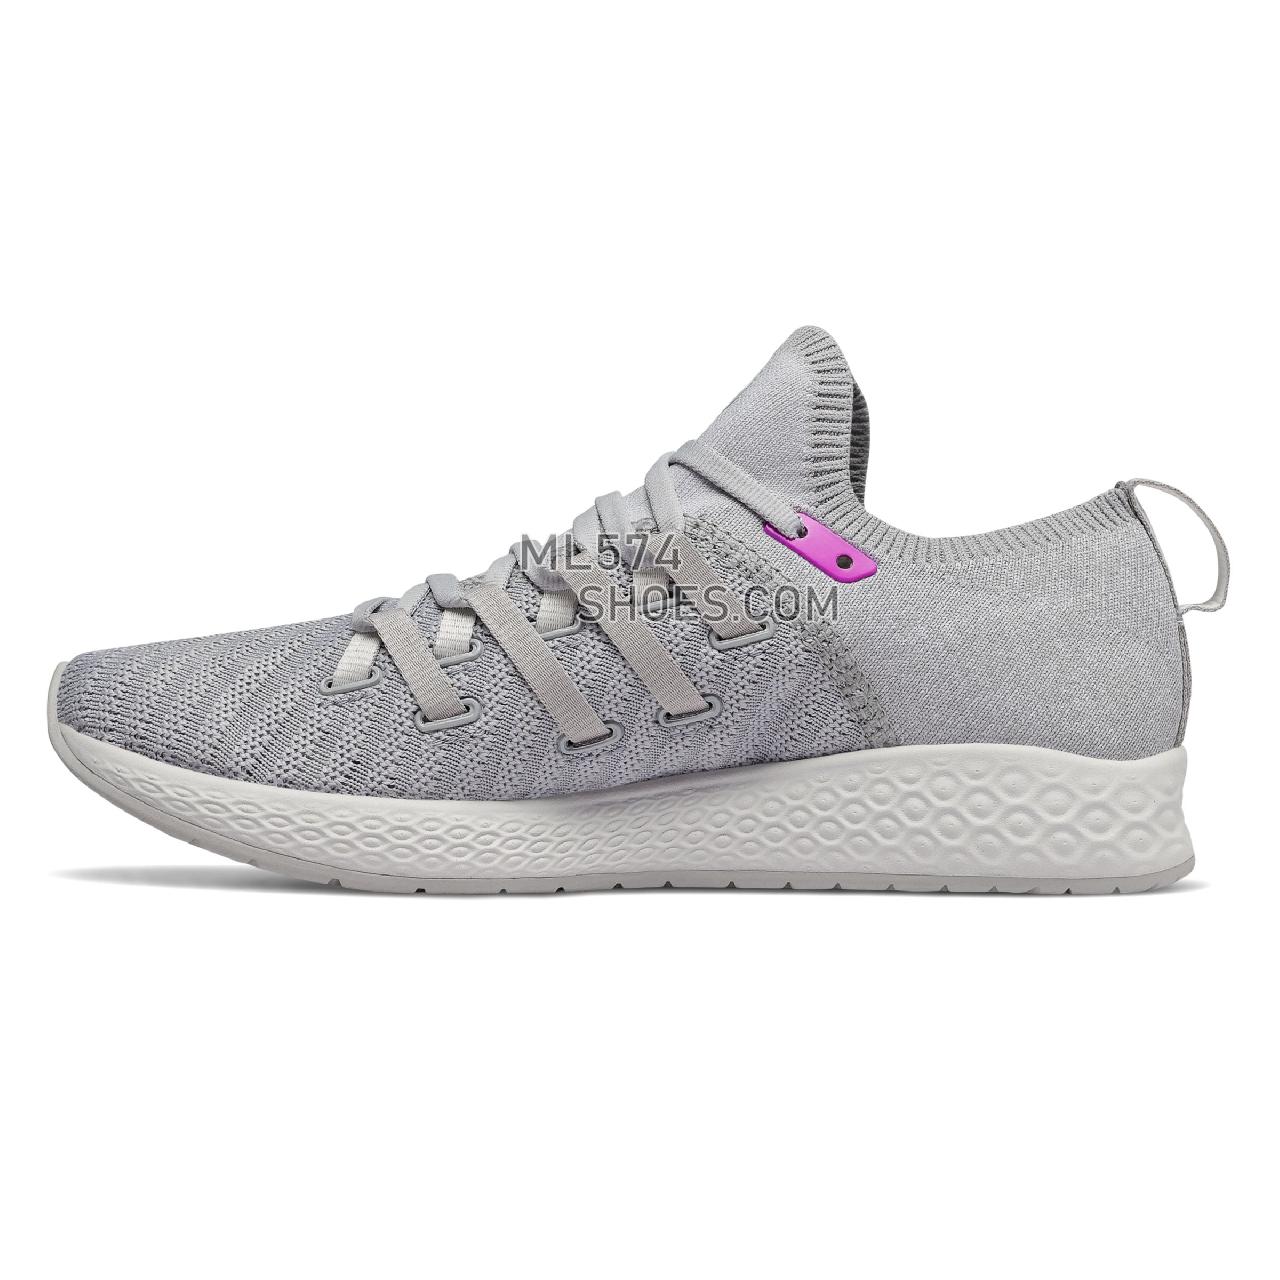 New Balance Fresh Foam Zante Trainer - Women's Fresh Foam Zante Trainer - Rain Cloud with Nimbus Cloud and Voltage Violet - WXZNTLW